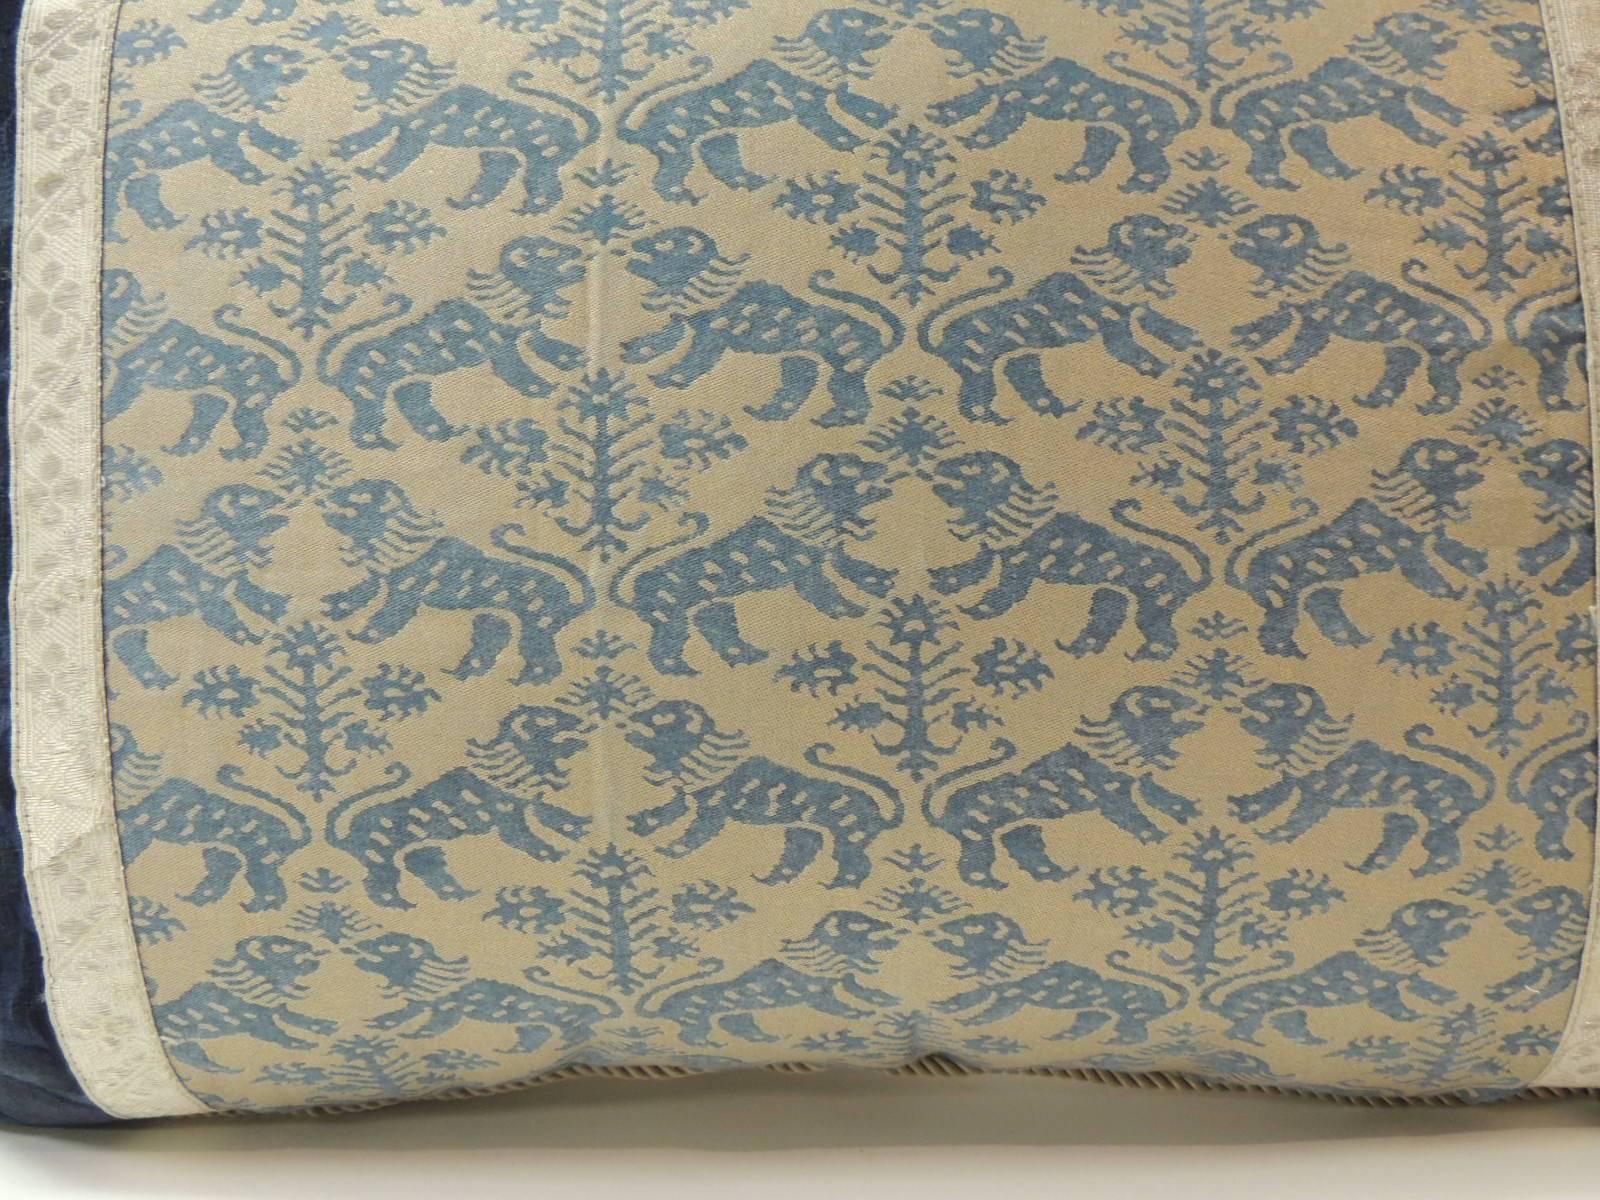 Regency Pair of Vintage Fortuny “Richelieu” Blue on Silver Decorative Bolster Pillows